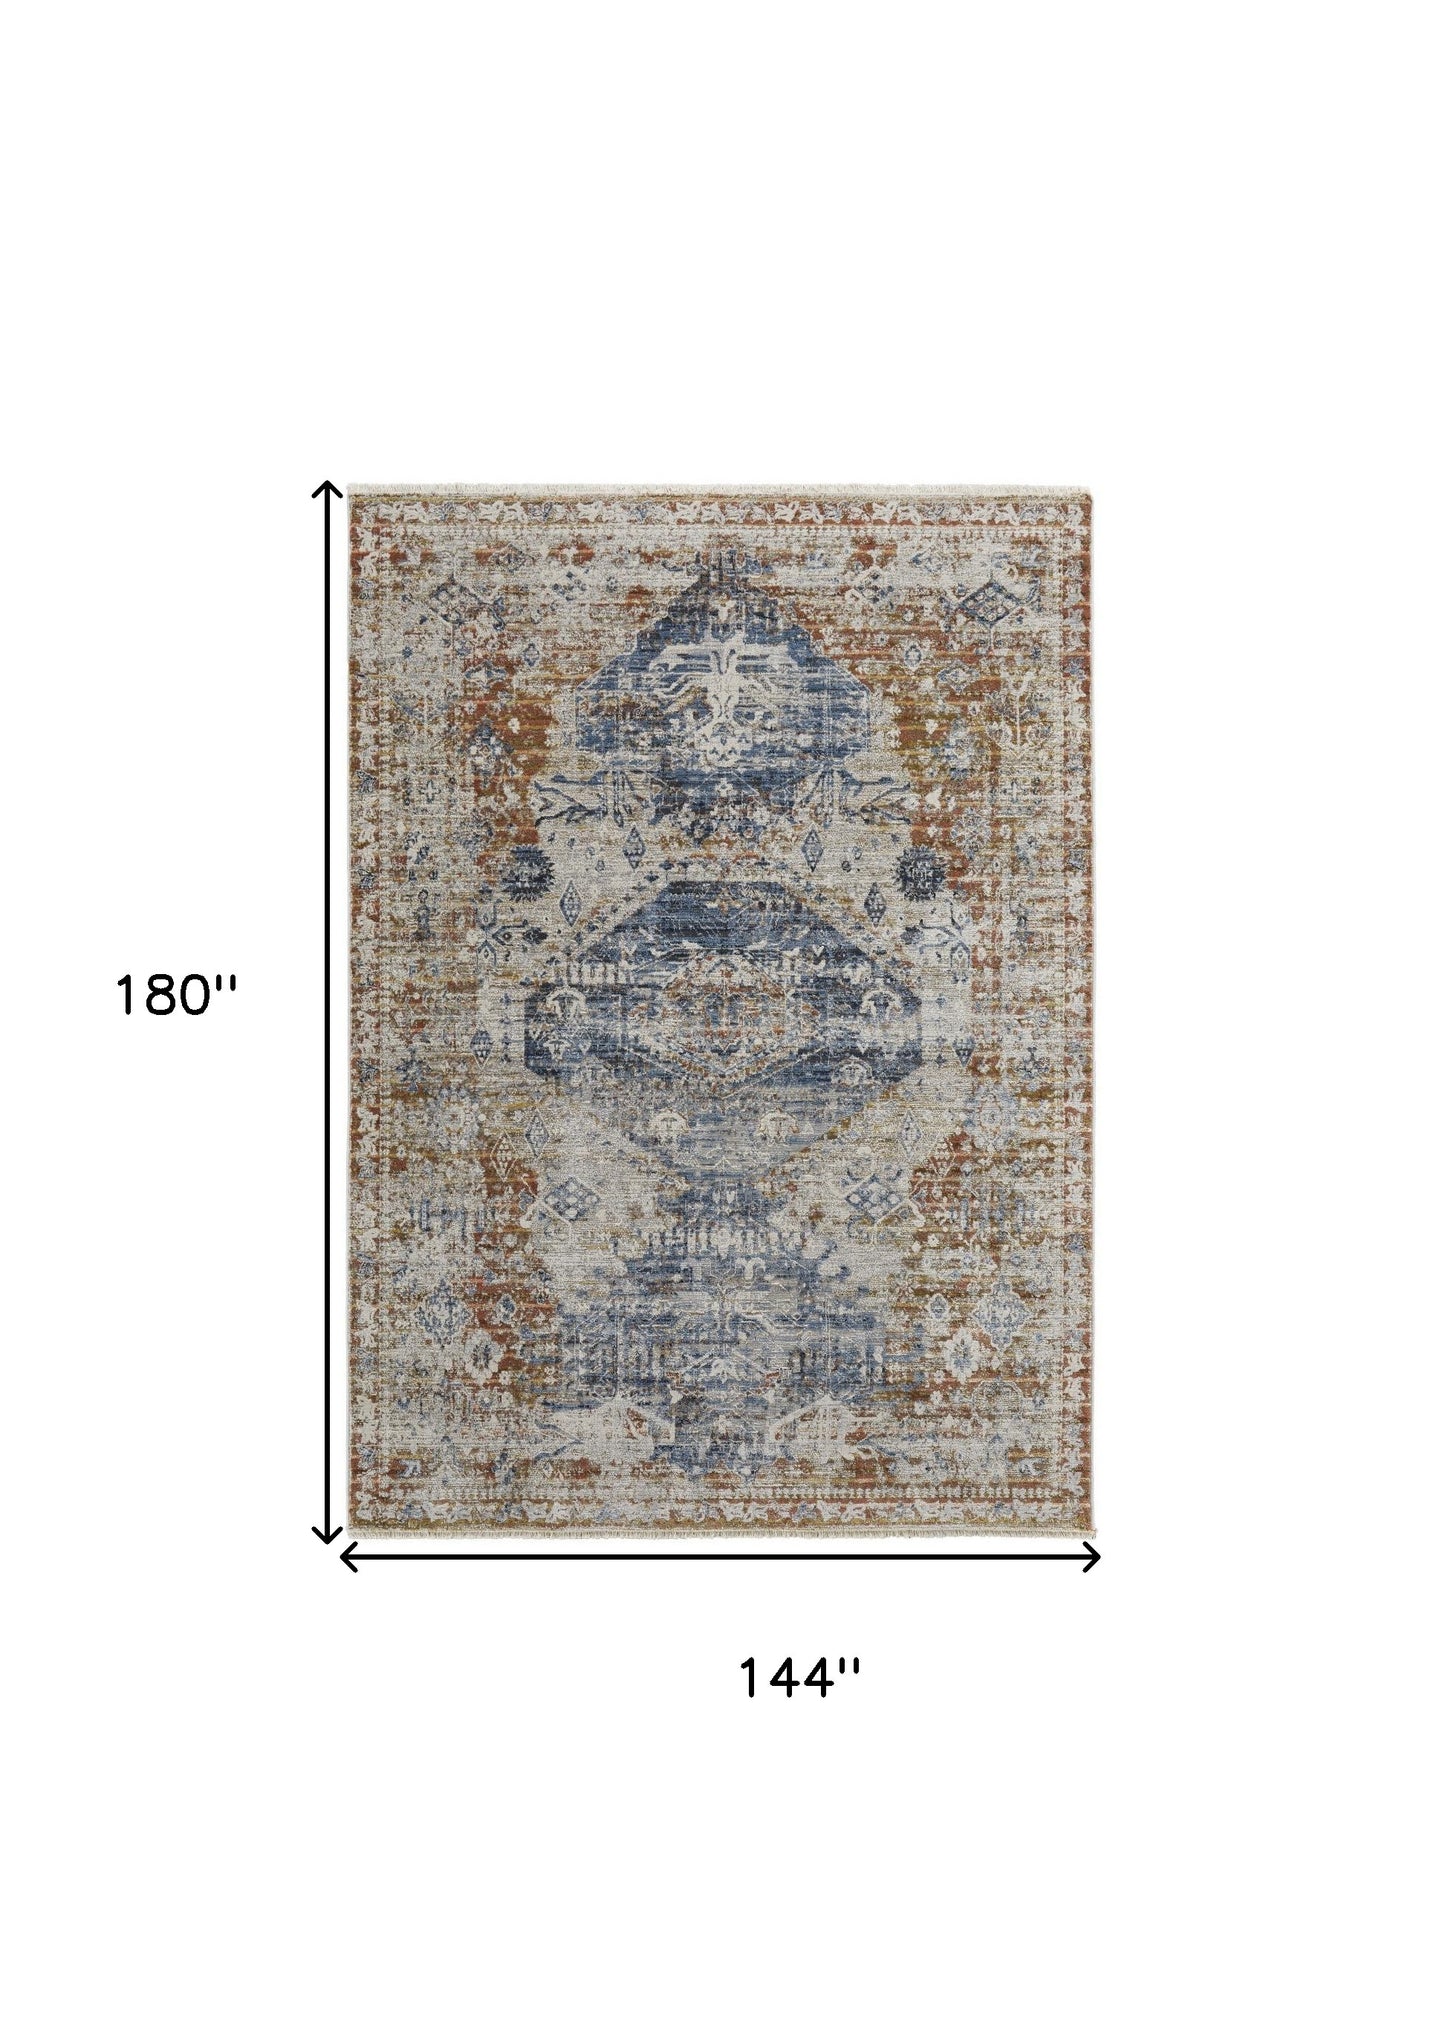 5' X 8' Ivory Orange And Blue Floral Power Loom Distressed Area Rug With Fringe